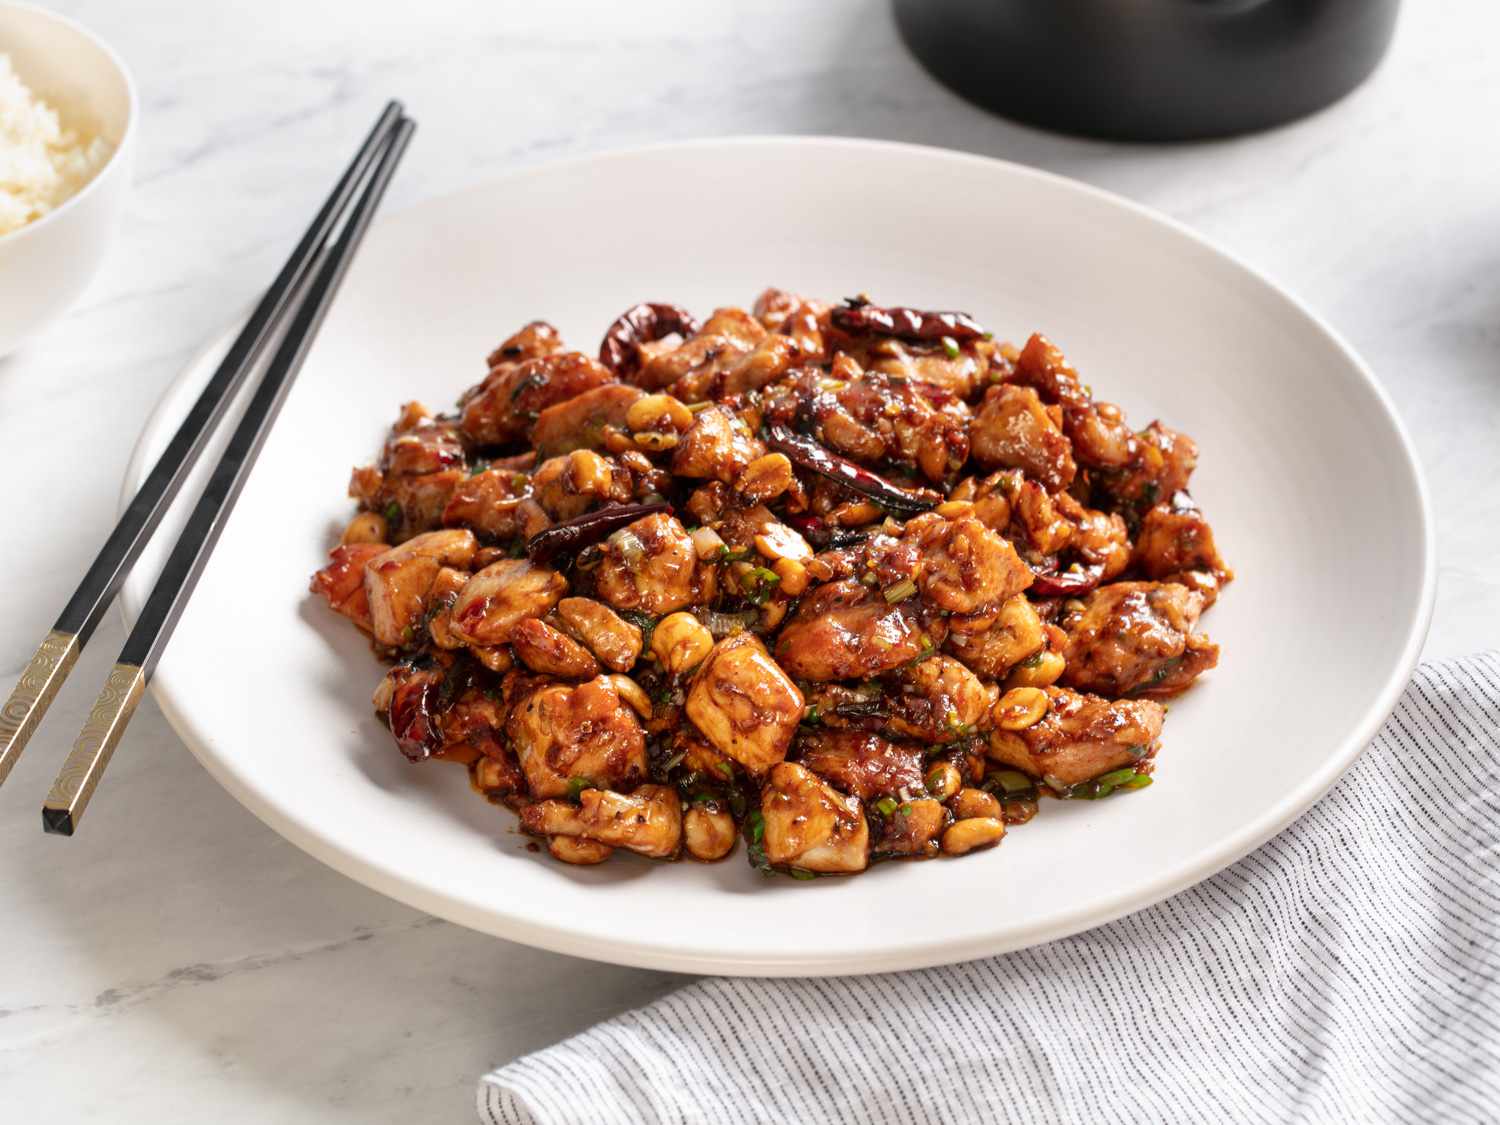 Authentic Kung Pao Chicken Recipe from Solanas Restaurant, Gurgaon